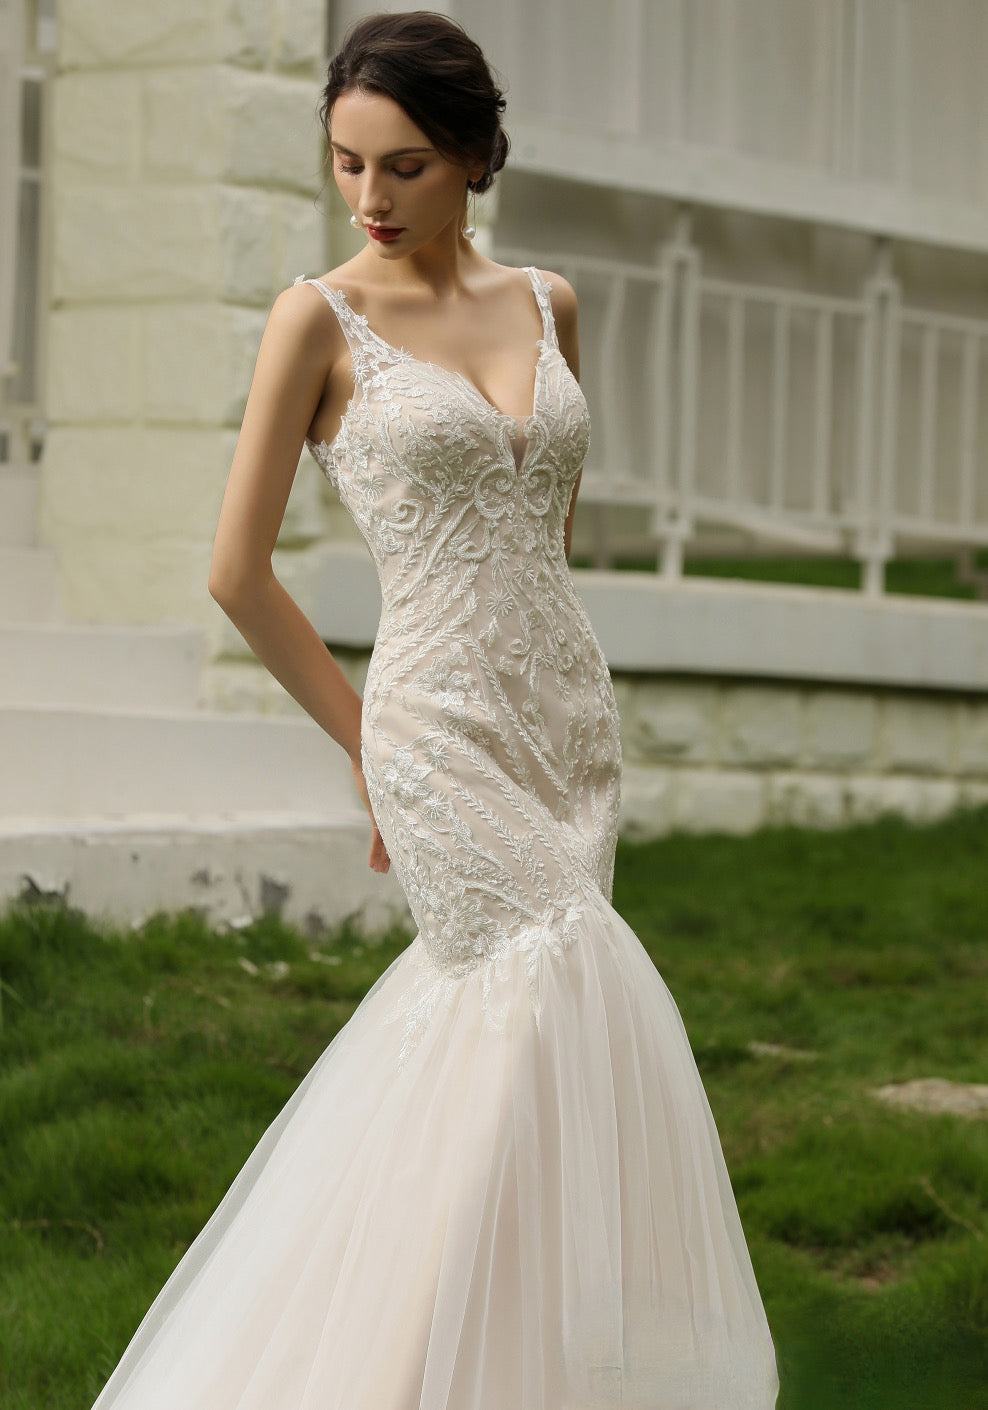 Elegant Beaded Lace Trumpet Tulle Bridal Gown